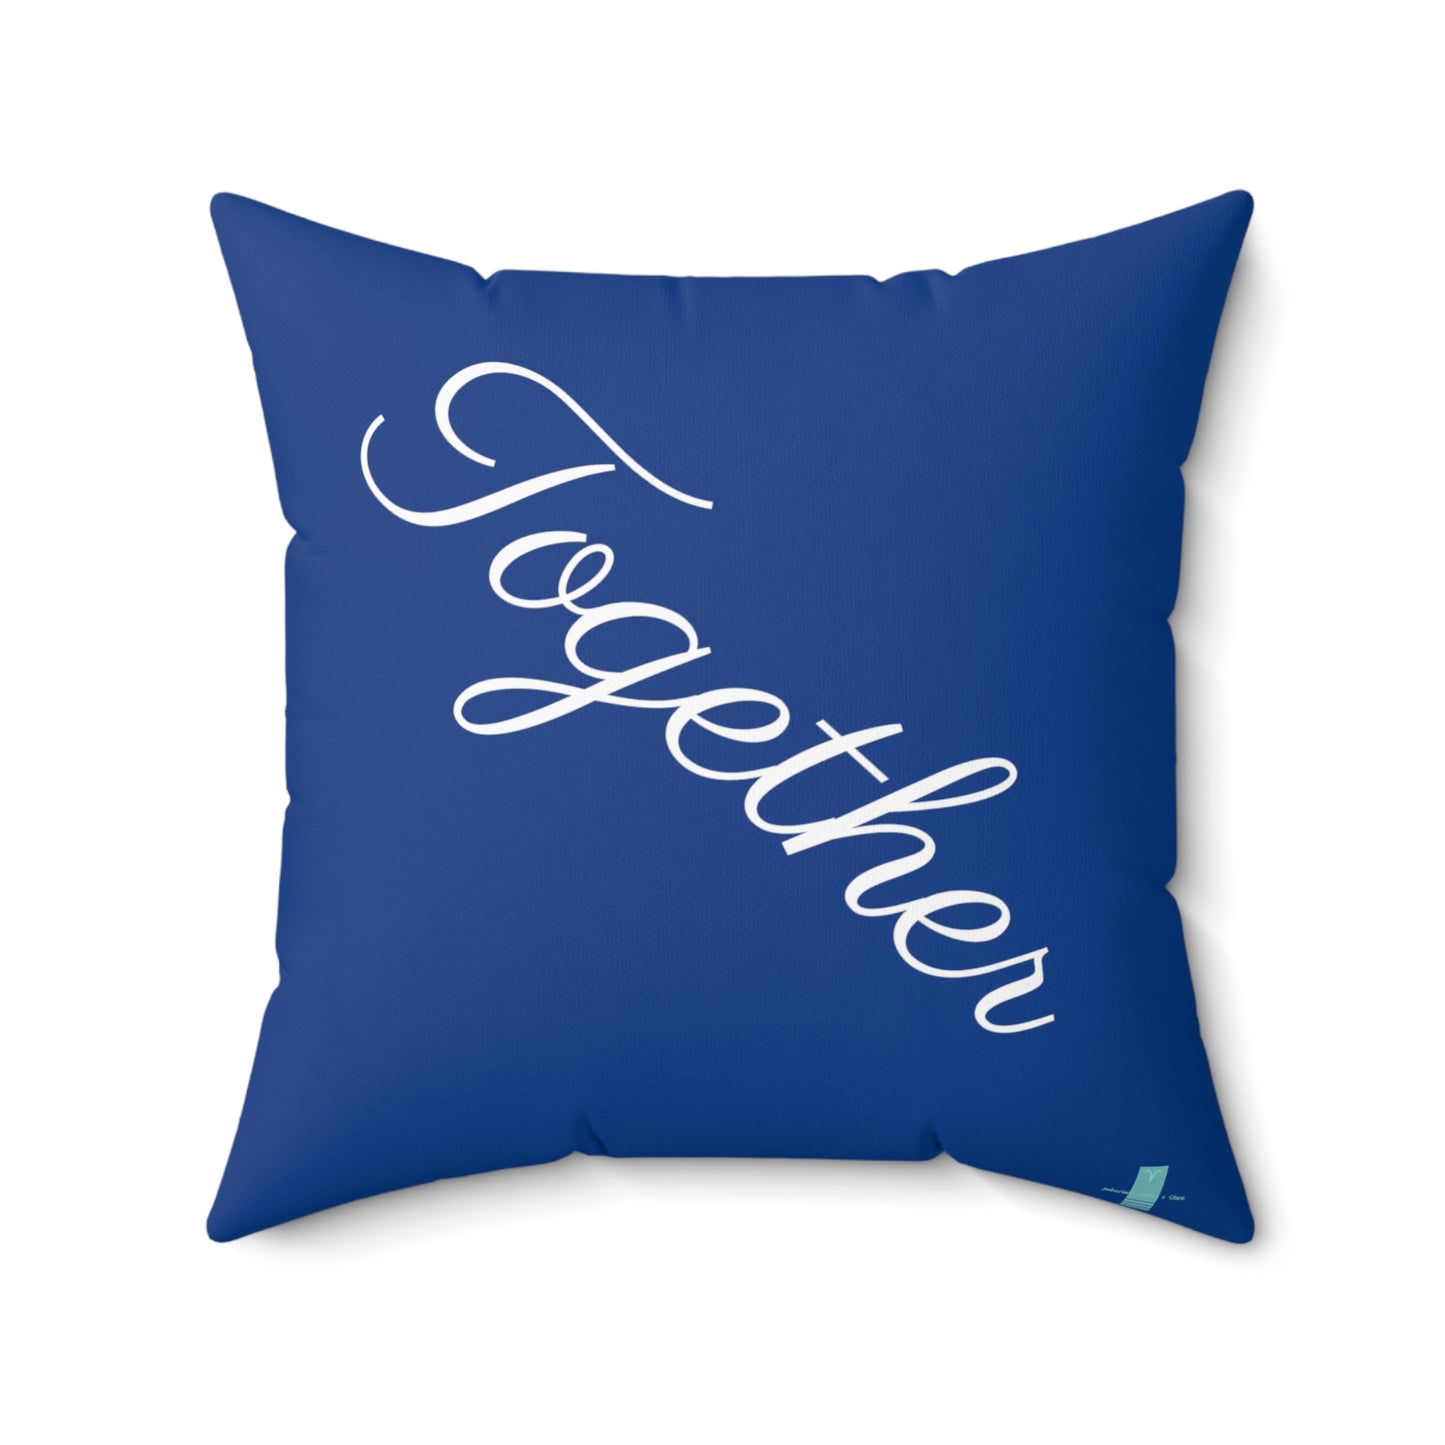 A You & Me Together Navy Spun Polyester Square Pillow